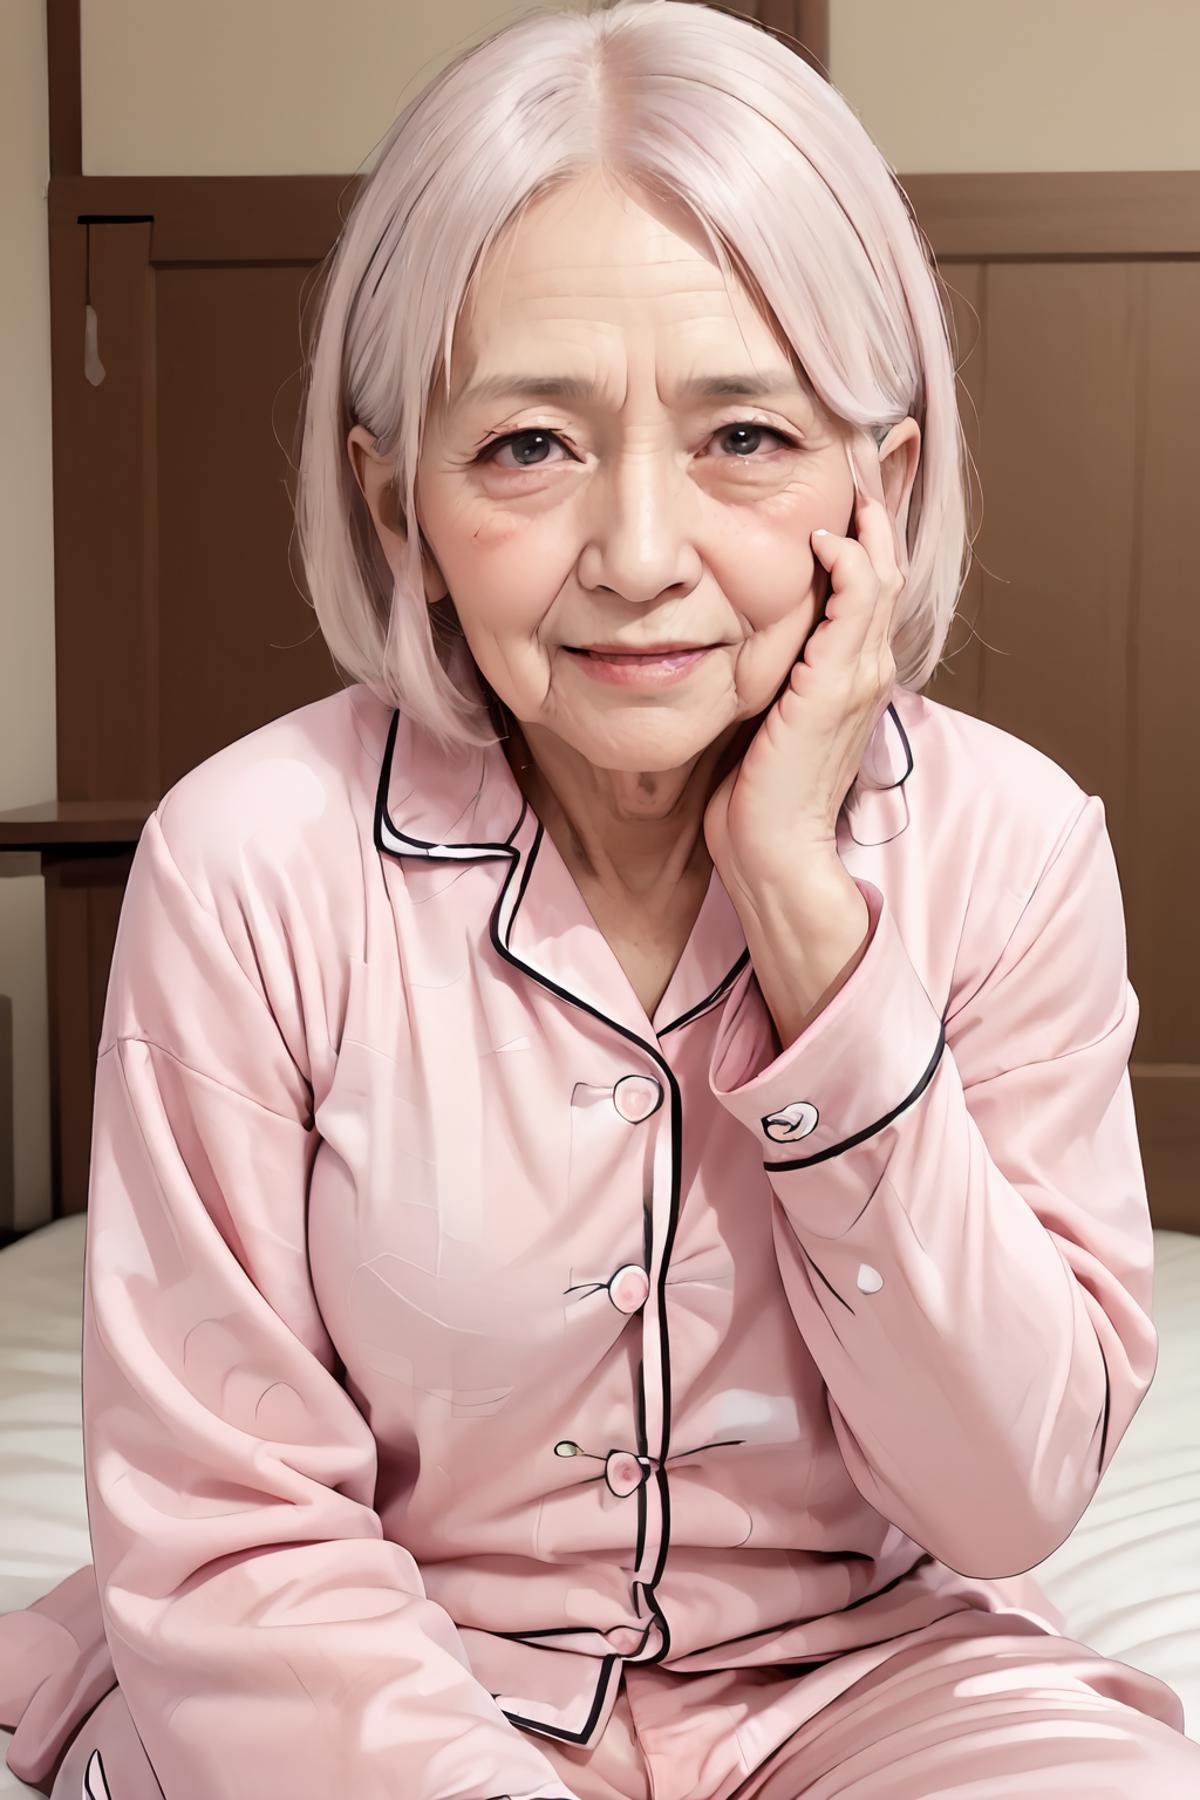 masterpiece,(high quality, best quality:1.2), smile, 80 years old woman,(an old lady nasolabial folds on face pink pajamas...